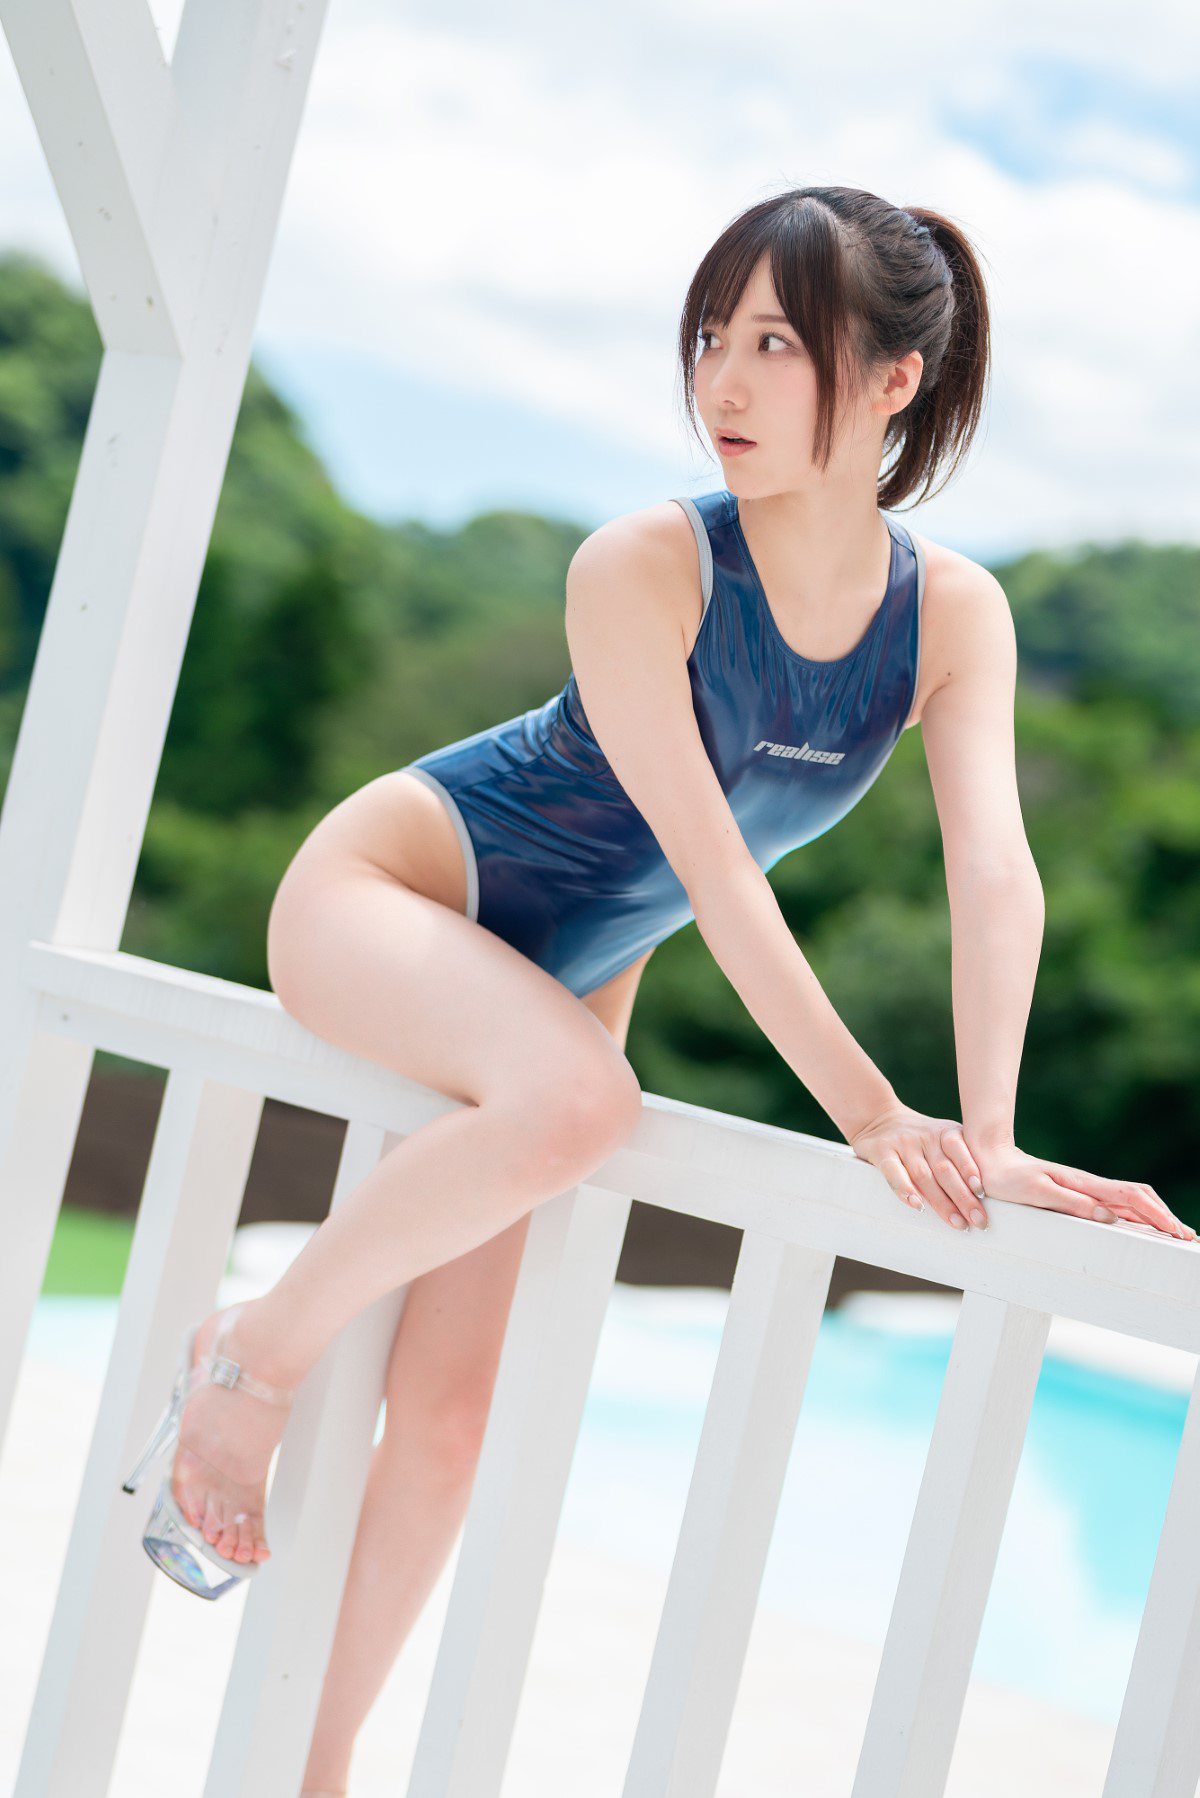 Photobook Kenken けんけん After a sunny day a swimsuit 晴れのち競泳水着 A 0023 6721172546.jpg